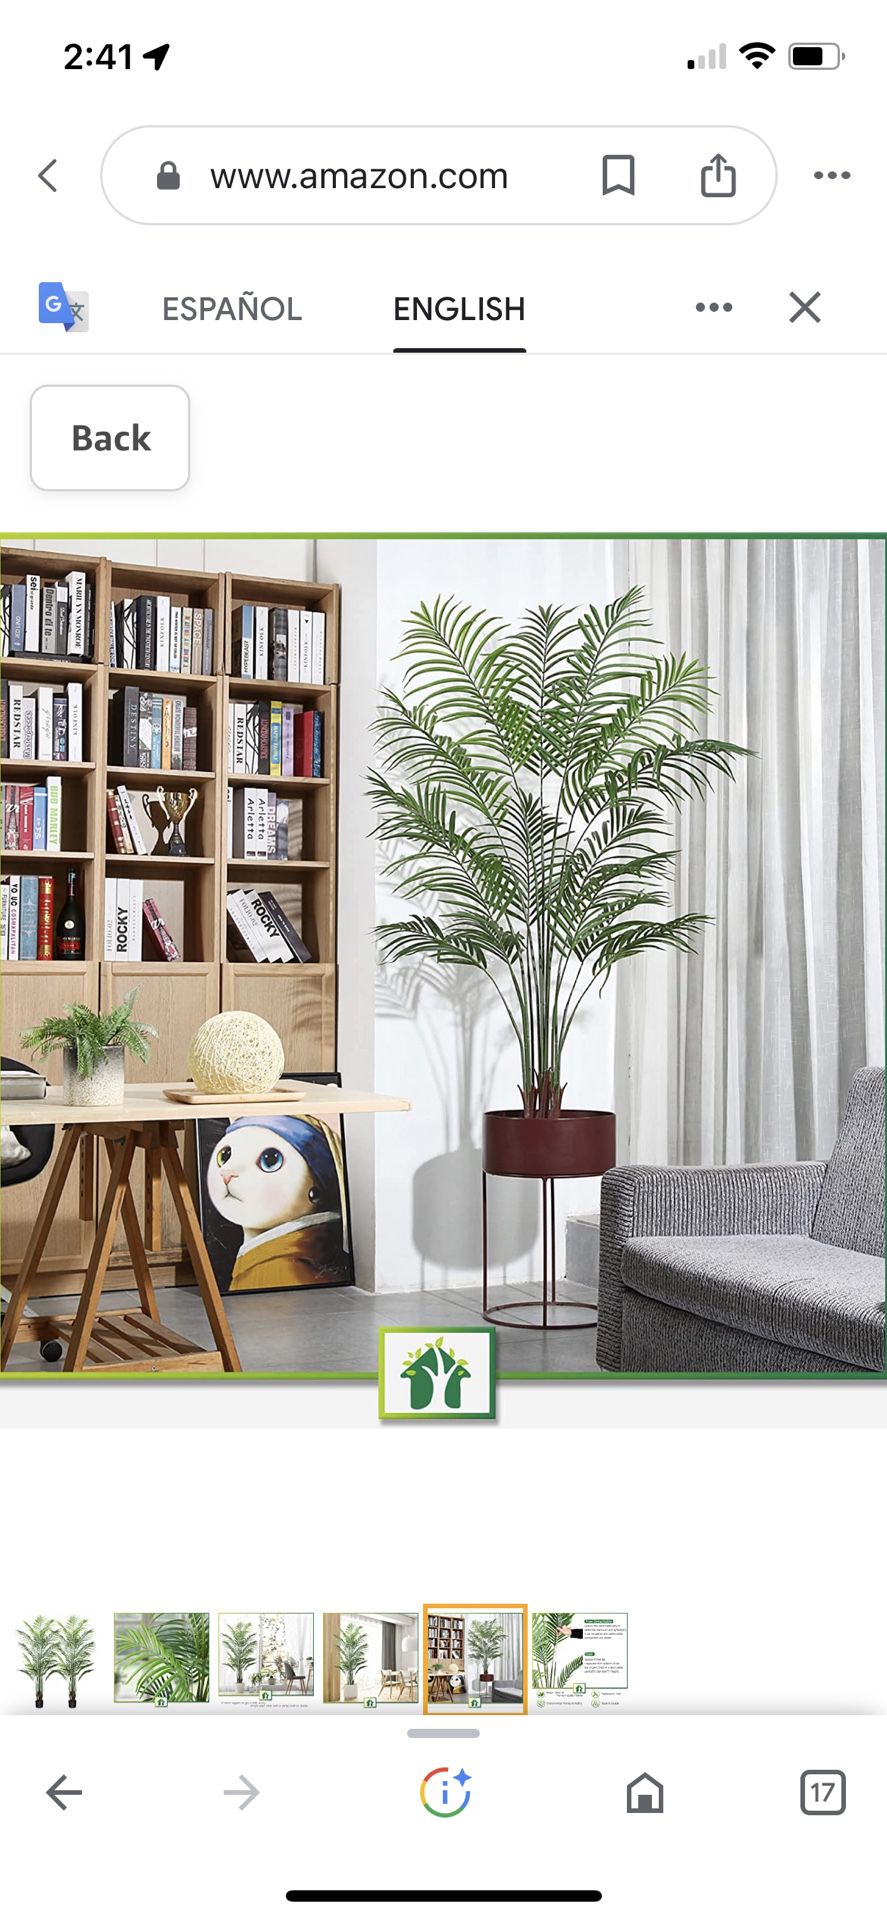 CROSOFMI 6' Artificial Areca Palm Plant, Fake Tropical Palm Tree, Perfect Faux Dypsis Lutescens Plants Potted for Indoor Outdoor Home Office Garden Mo